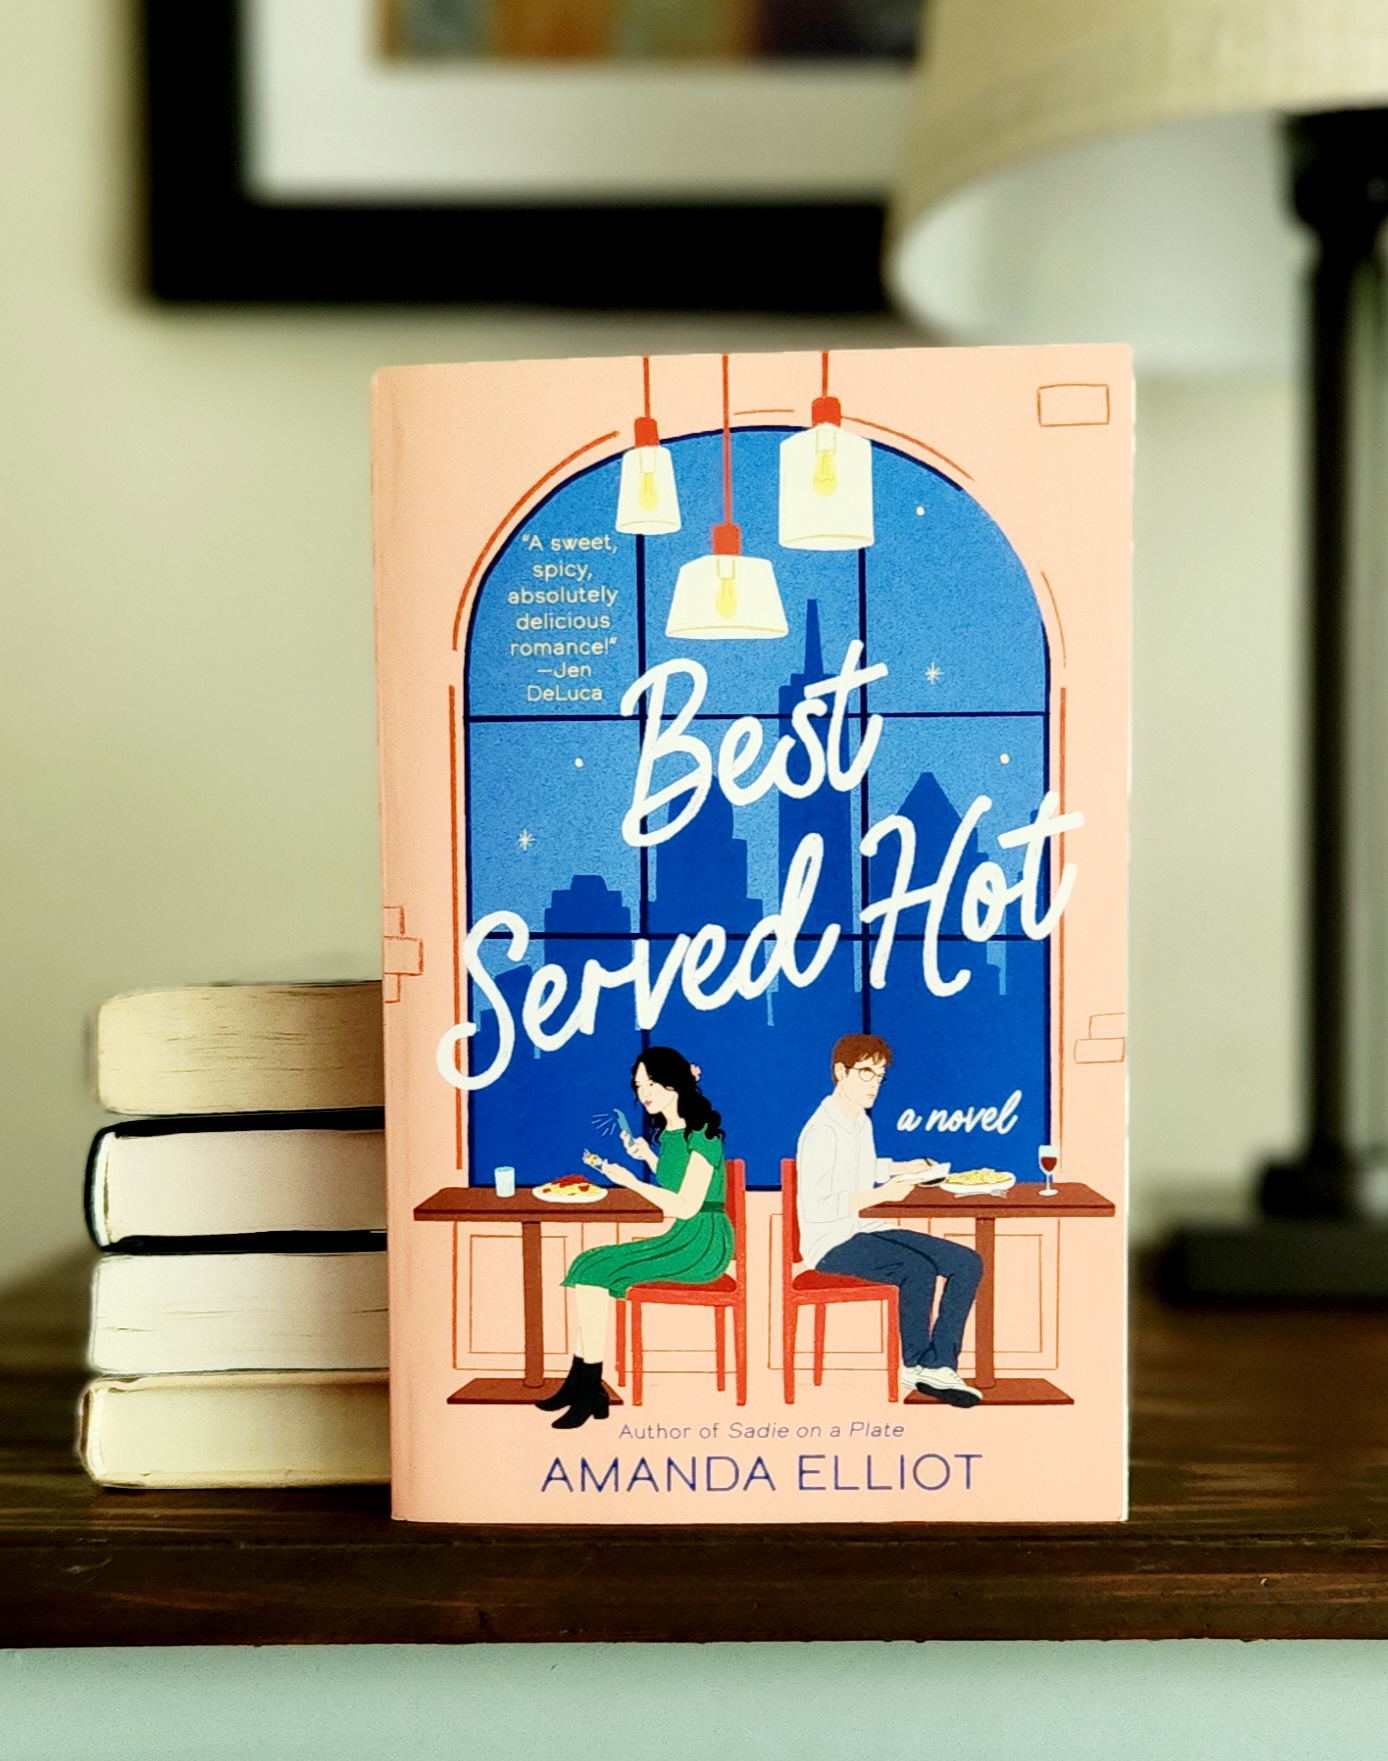 book cover of best served hot in front of other books